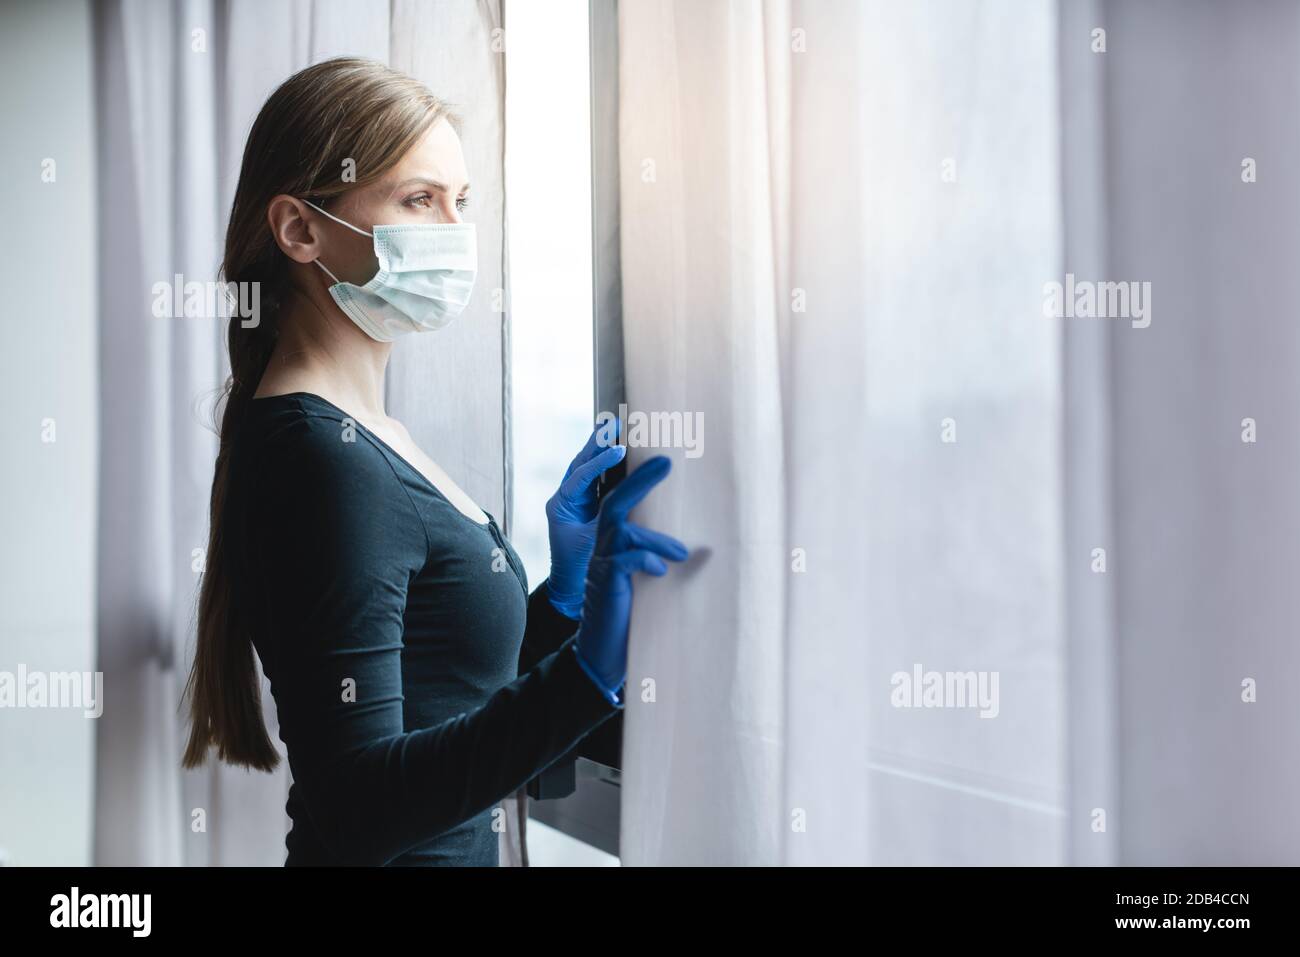 Bored woman in corona quarantine looking out of window to the street Stock Photo